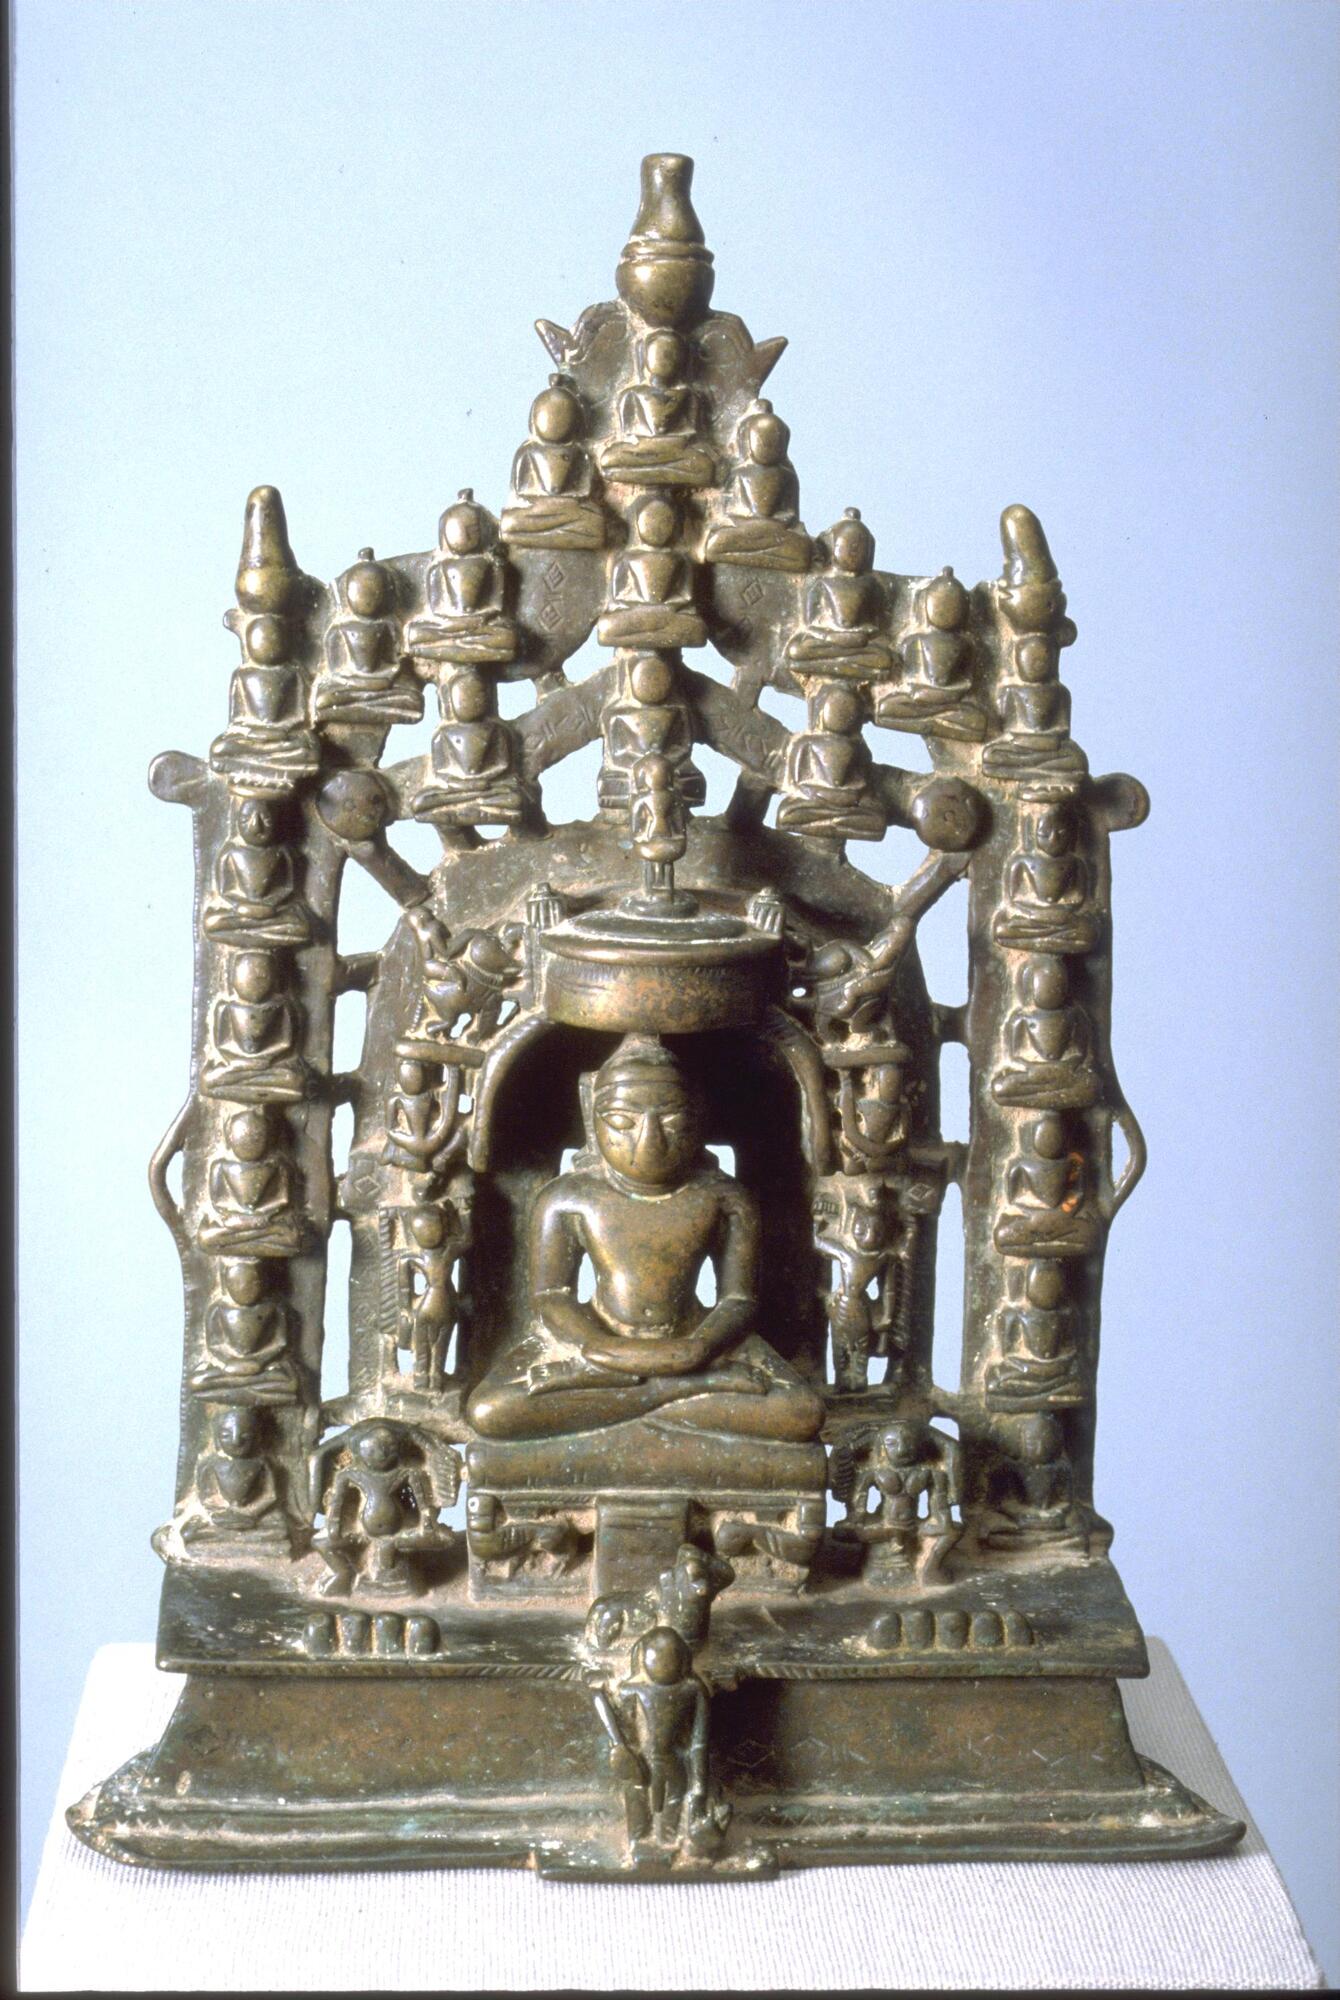 This shrine depicts a large seated Jina surrounded by 23 other jina figures and a variety of attendants.  The Jina figures that adorn the sides and are arranged in tiers above the main figure. The side columns and the whole is surmounted by auspicious pot forms.  The main figure sits in the lotus position on a lion throne flanked by a male and female demigod.  Along the sides he is flanked by standing cauri bearers, garland bearers above them and riders on elephants above that with an umbrella with a standing figure on it above his head.  At the base in the center is a standing figure holding a sick or club with a bull cognizance behind him on the base of the throne.  The nine globs on the base, four to his right and five to his left represent the nine planets and his hands folded in a gesture of meditation<br />